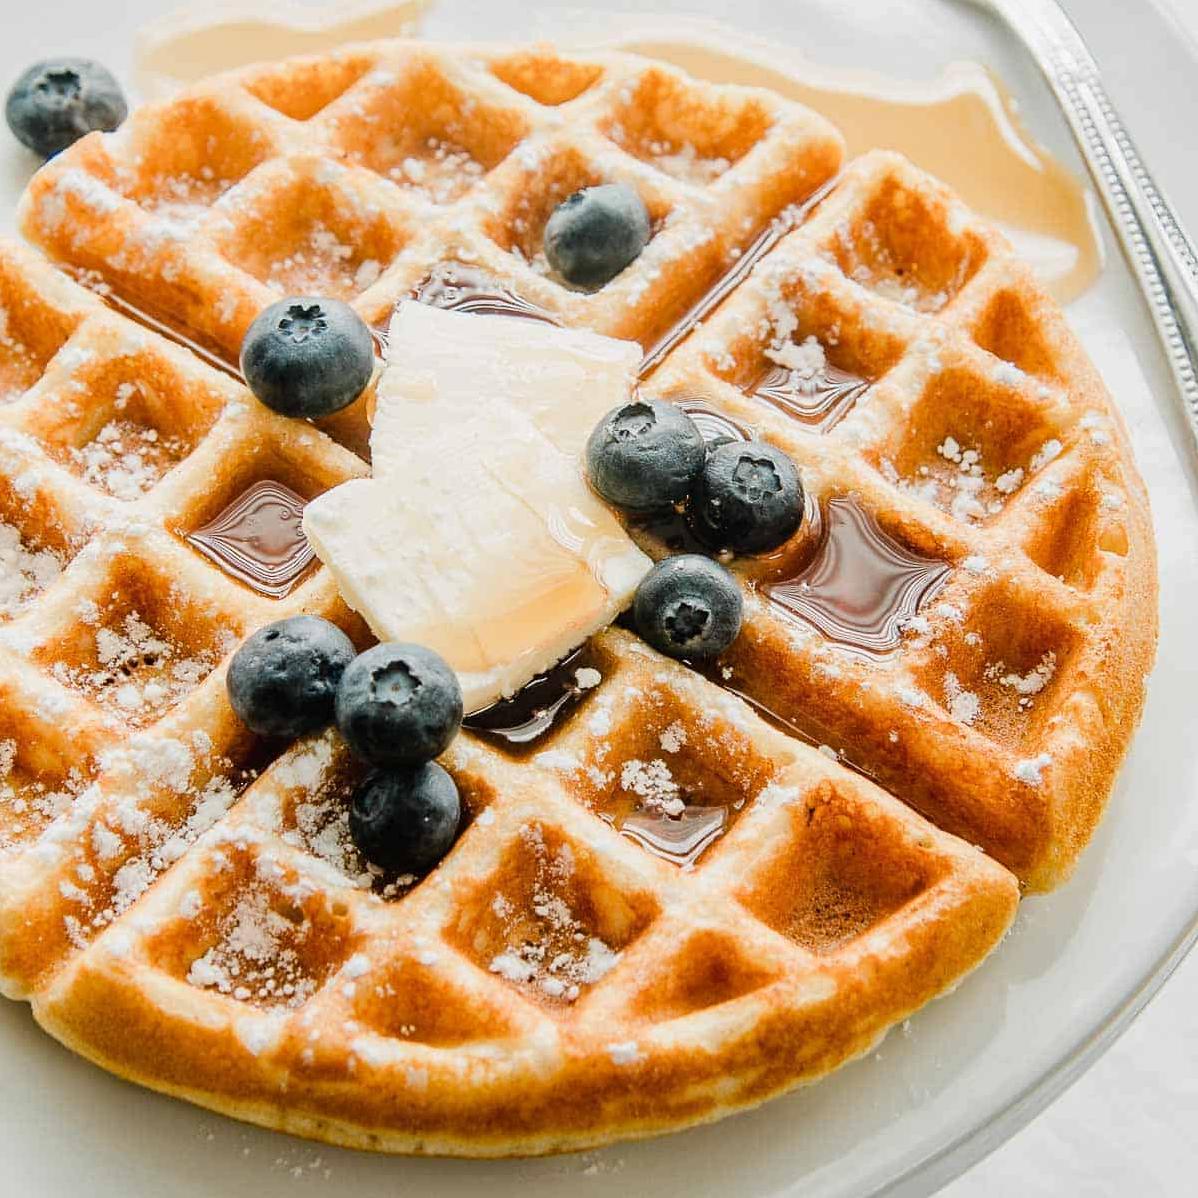  These golden waffles are extra crisp and gluten-free.